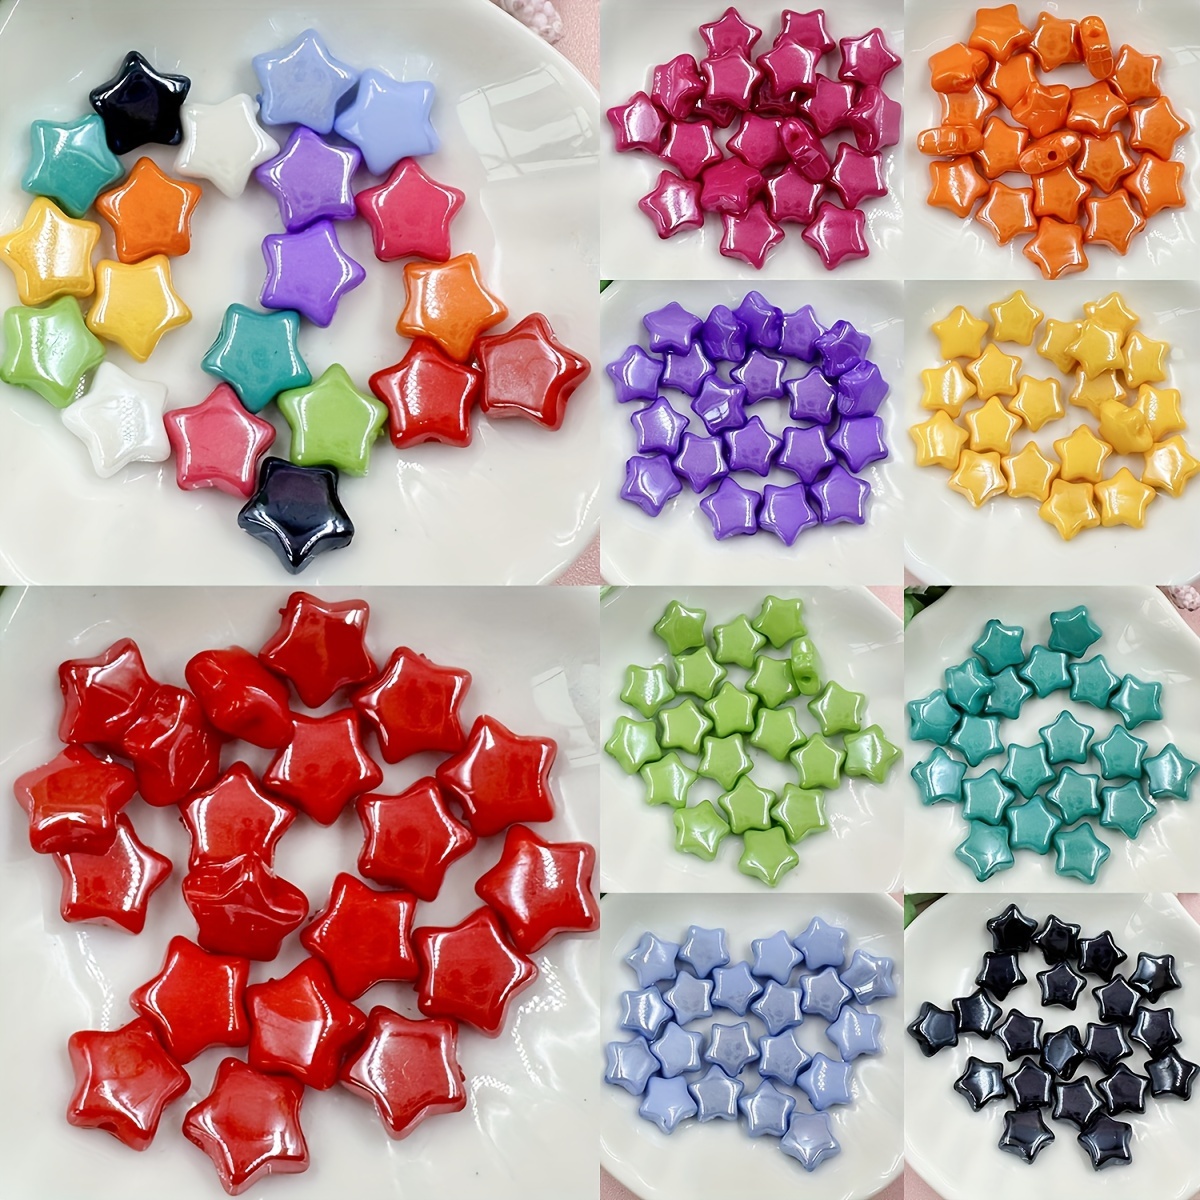 AMOBESTER Colorful Stars Beads 12mm Transparent Acrylic Beads for Bracelets Necklace Jewelry Making DIY Crafting 200psc